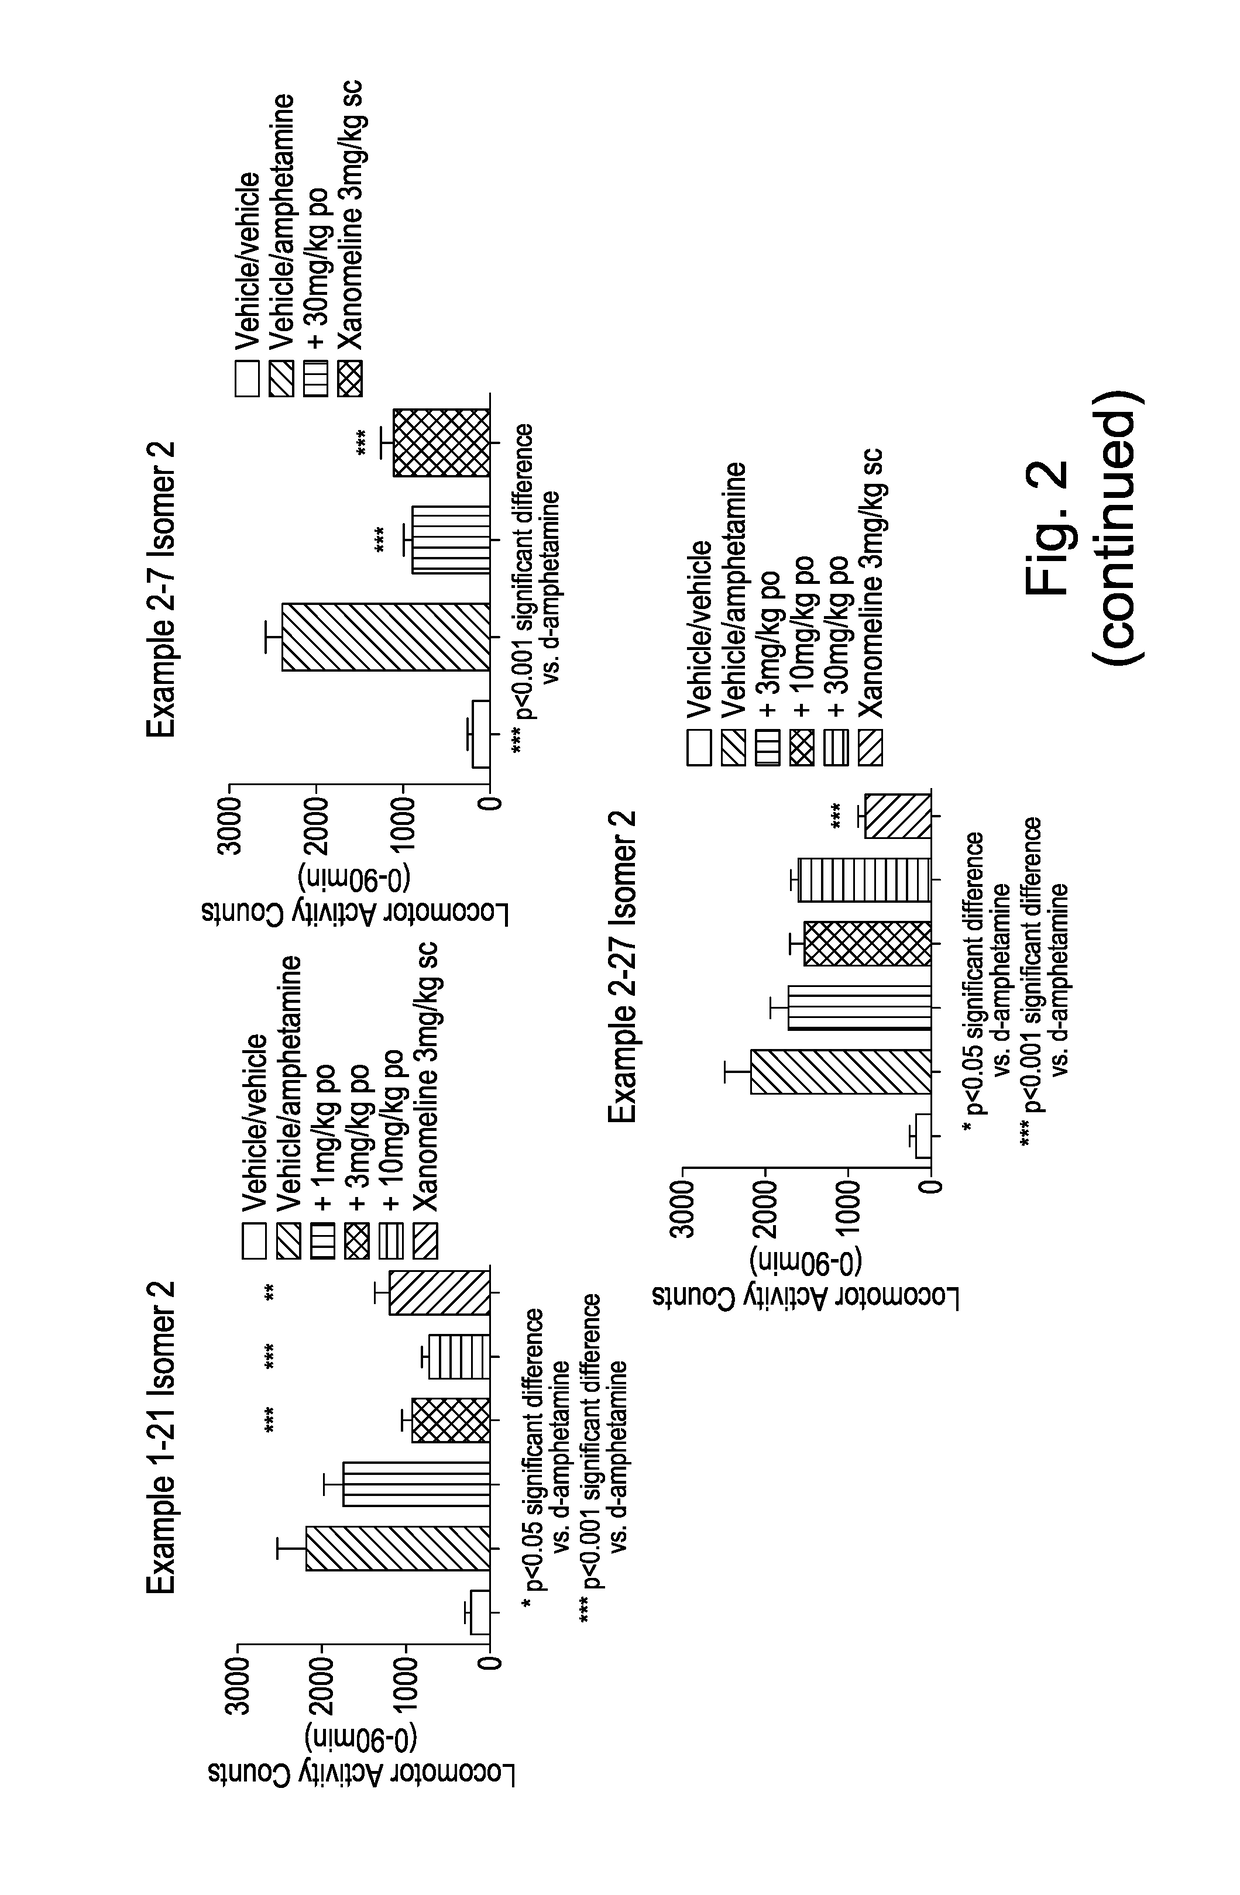 Bicyclic aza compounds as muscarinic M1 receptor and/or M4 receptor agonists